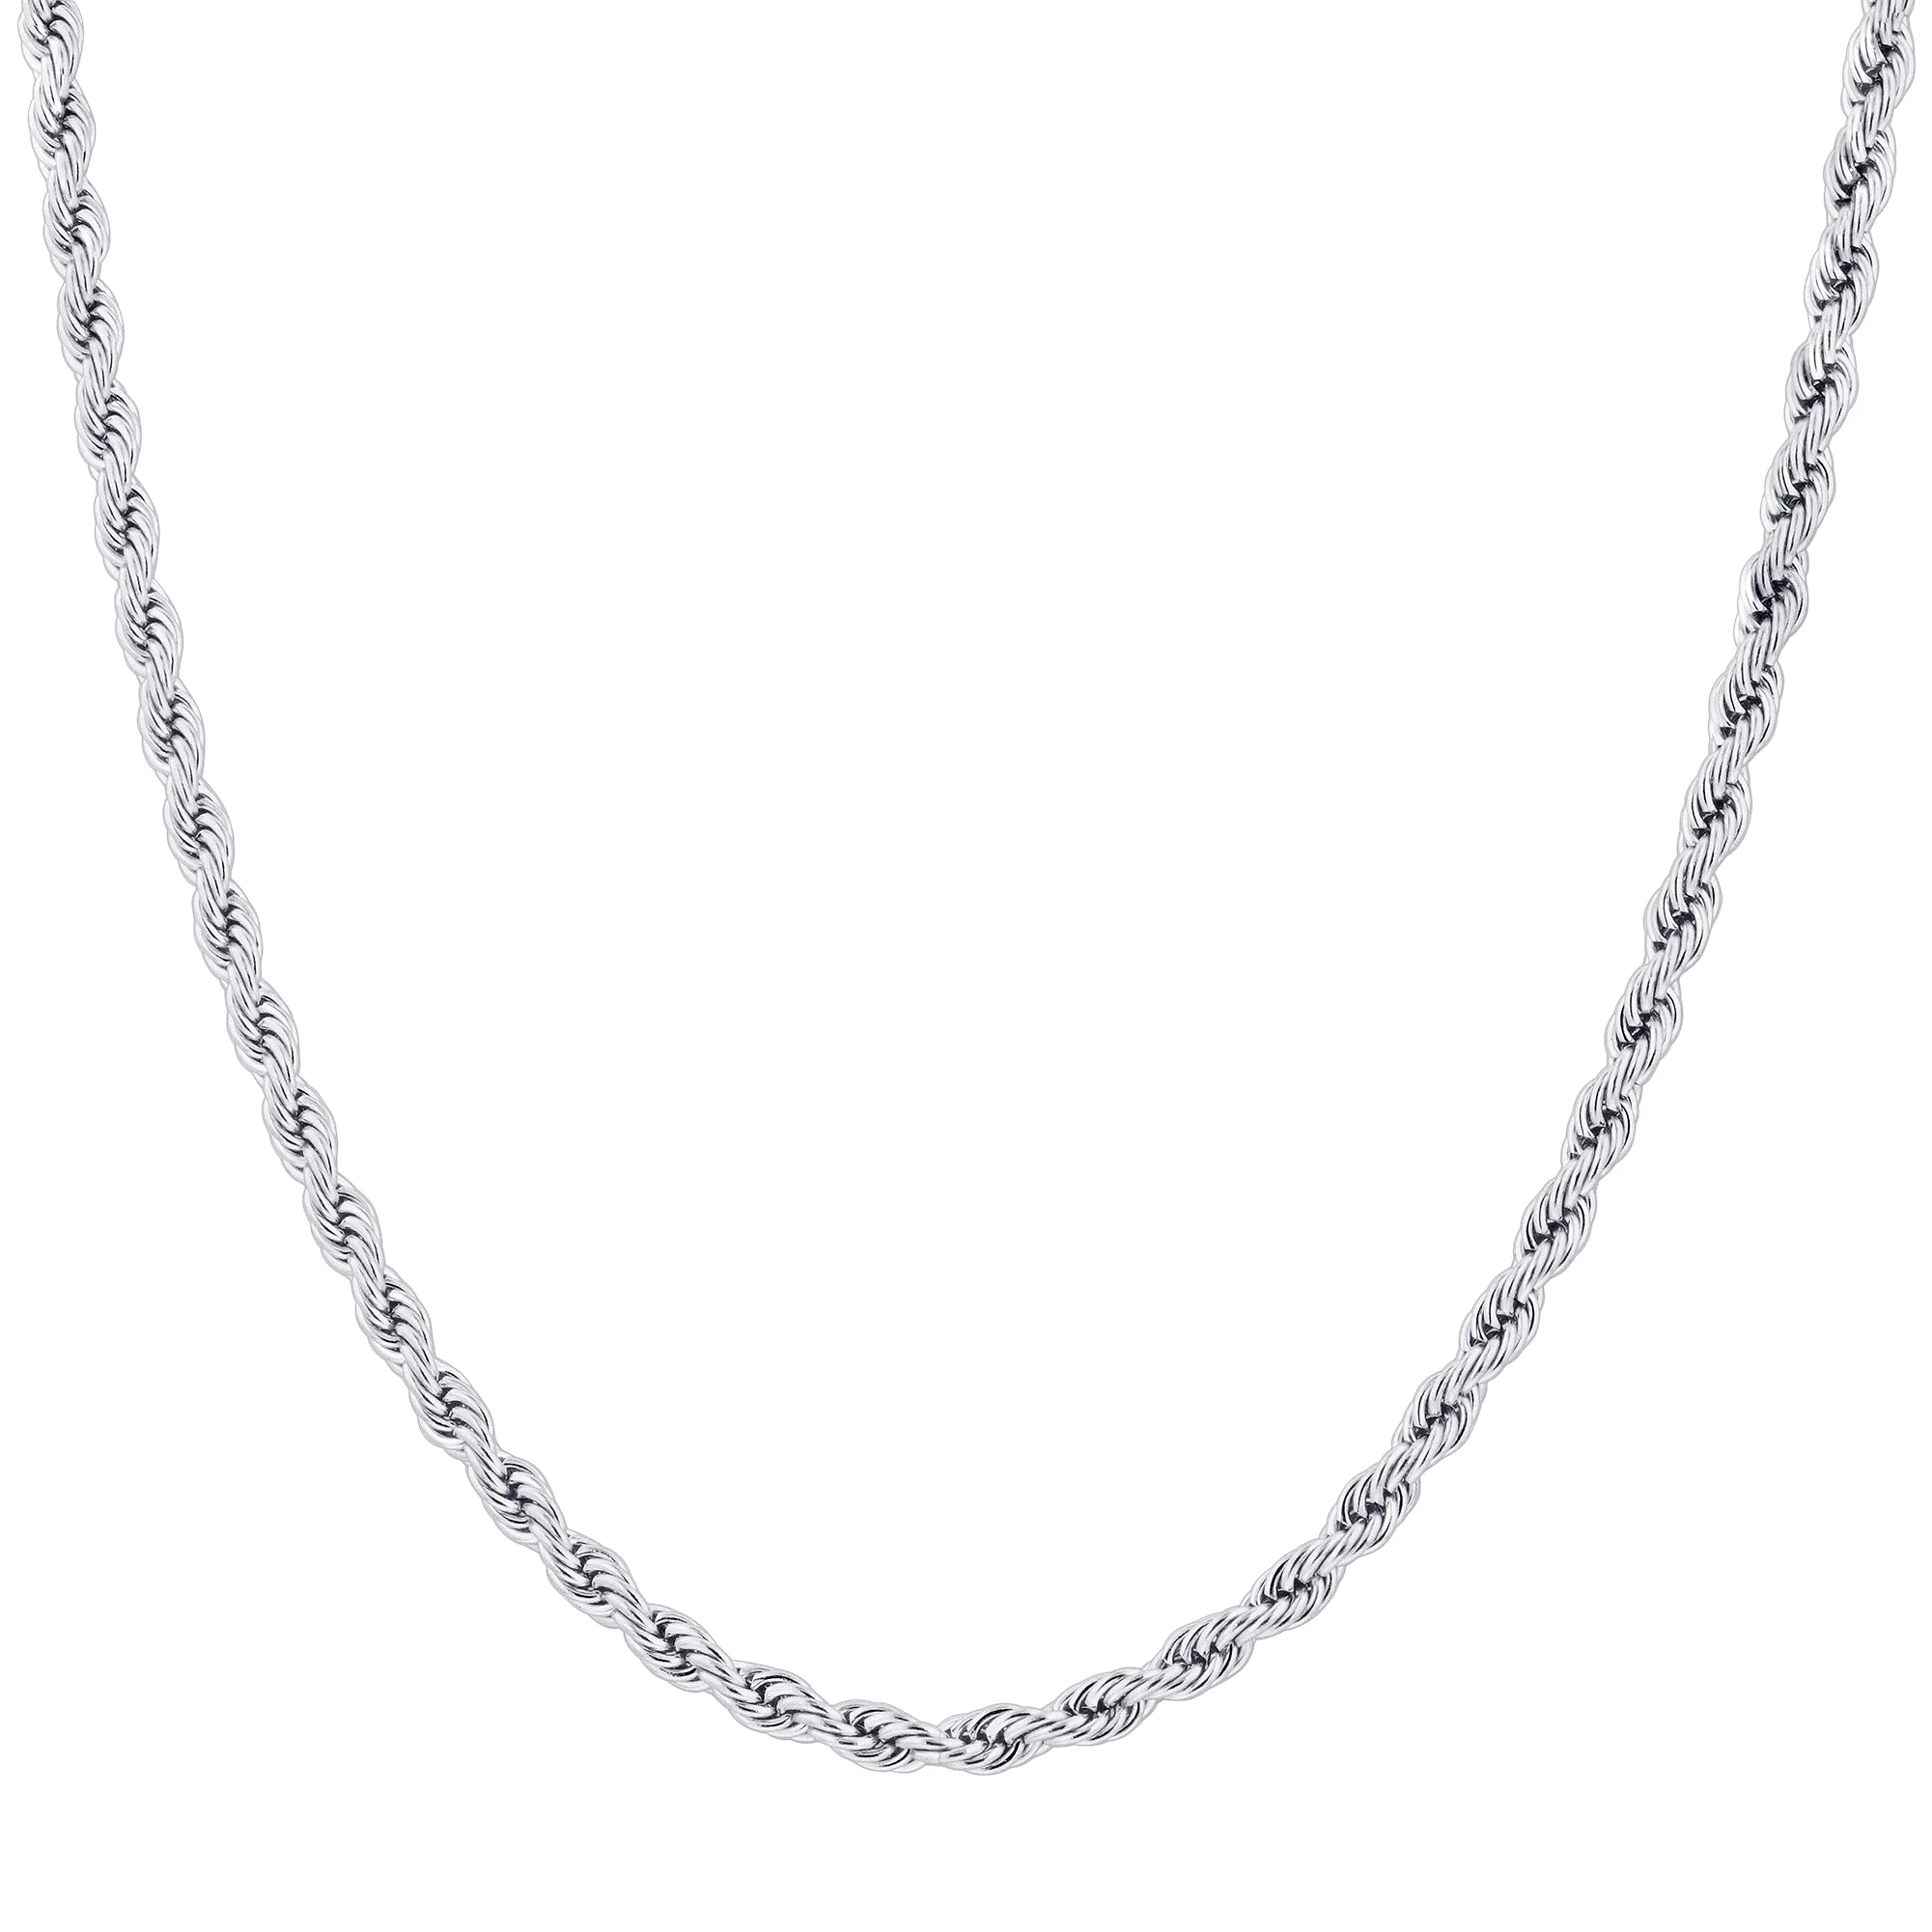 Gem Avenue Stainless Steel 4mm Rope Chain 16" Necklace